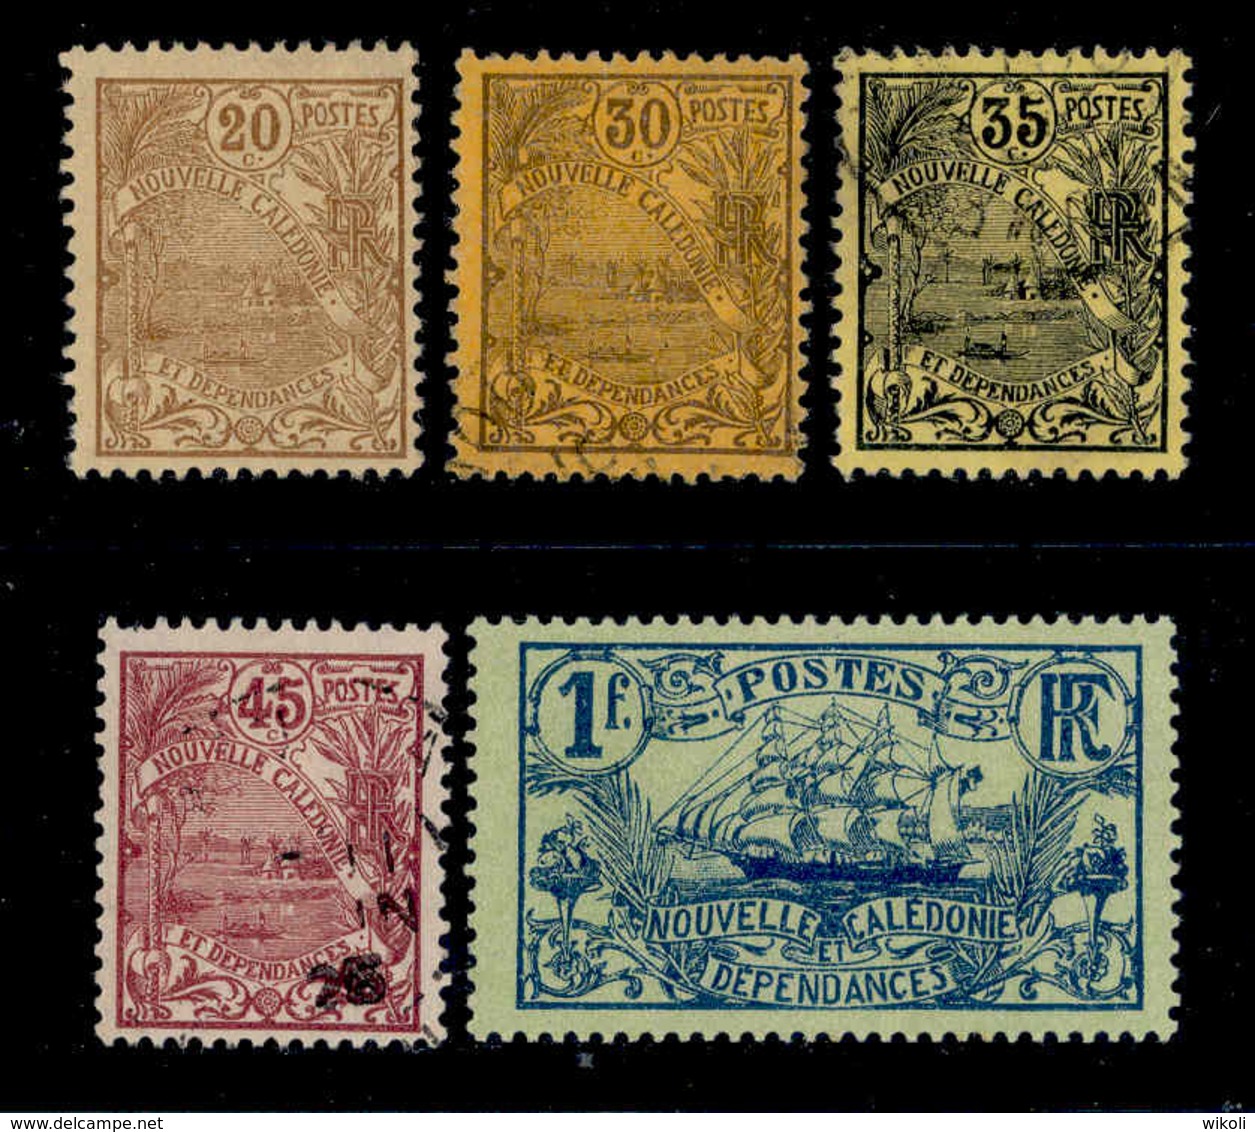 ! ! New Caledonia - 1905 Stamps - YT 94, 96, 97, 99 & 102 - MH & Used (AA035) - Unused Stamps